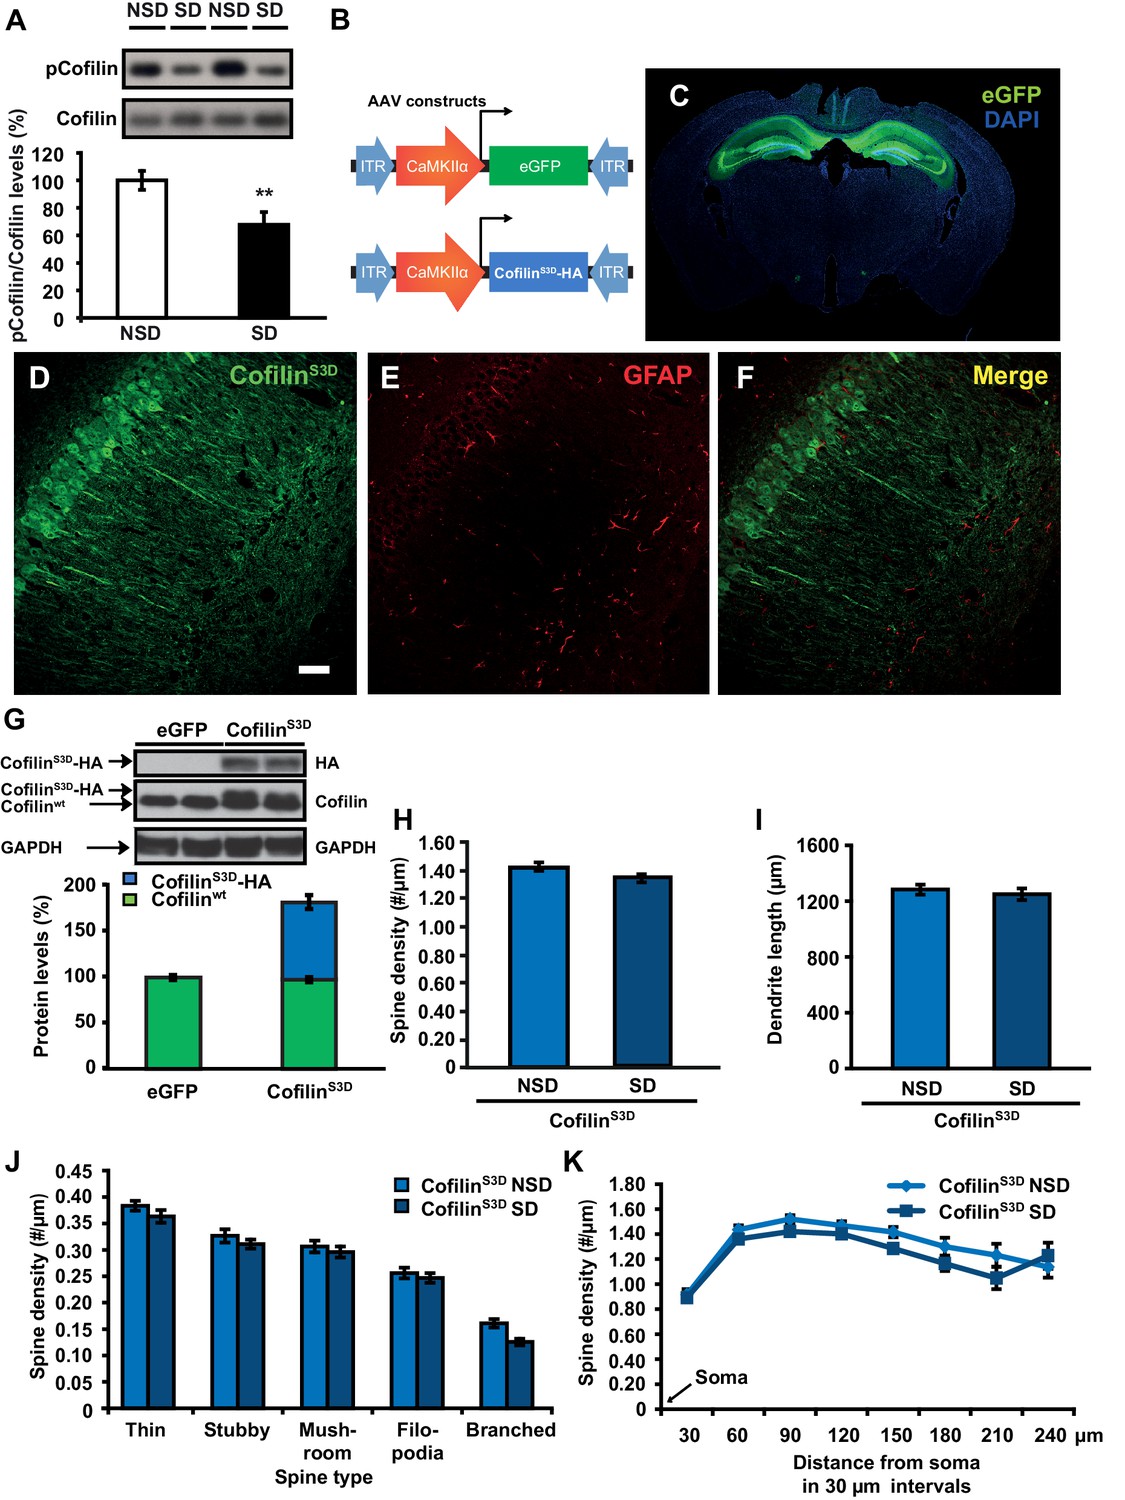 Prolonged exposure to high fluoride levels during adolescence to adulthood  elicits molecular, morphological, and functional impairments in the  hippocampus